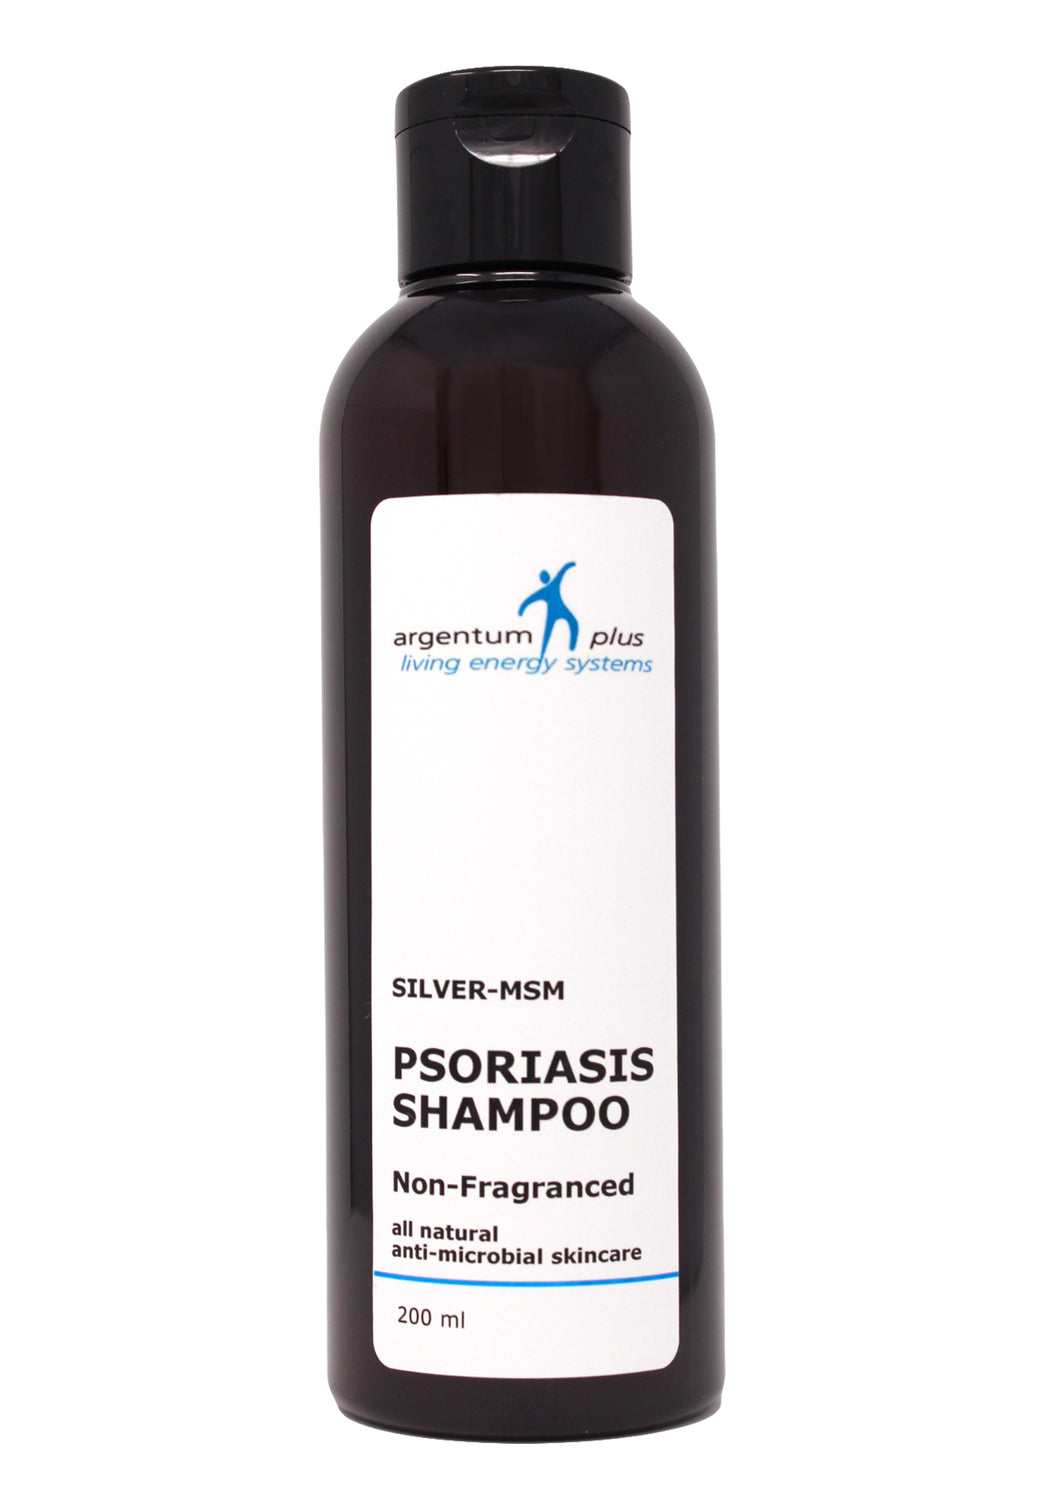 Silver-MSM Psoriasis Shampoo Non-Fragranced (2 size options)